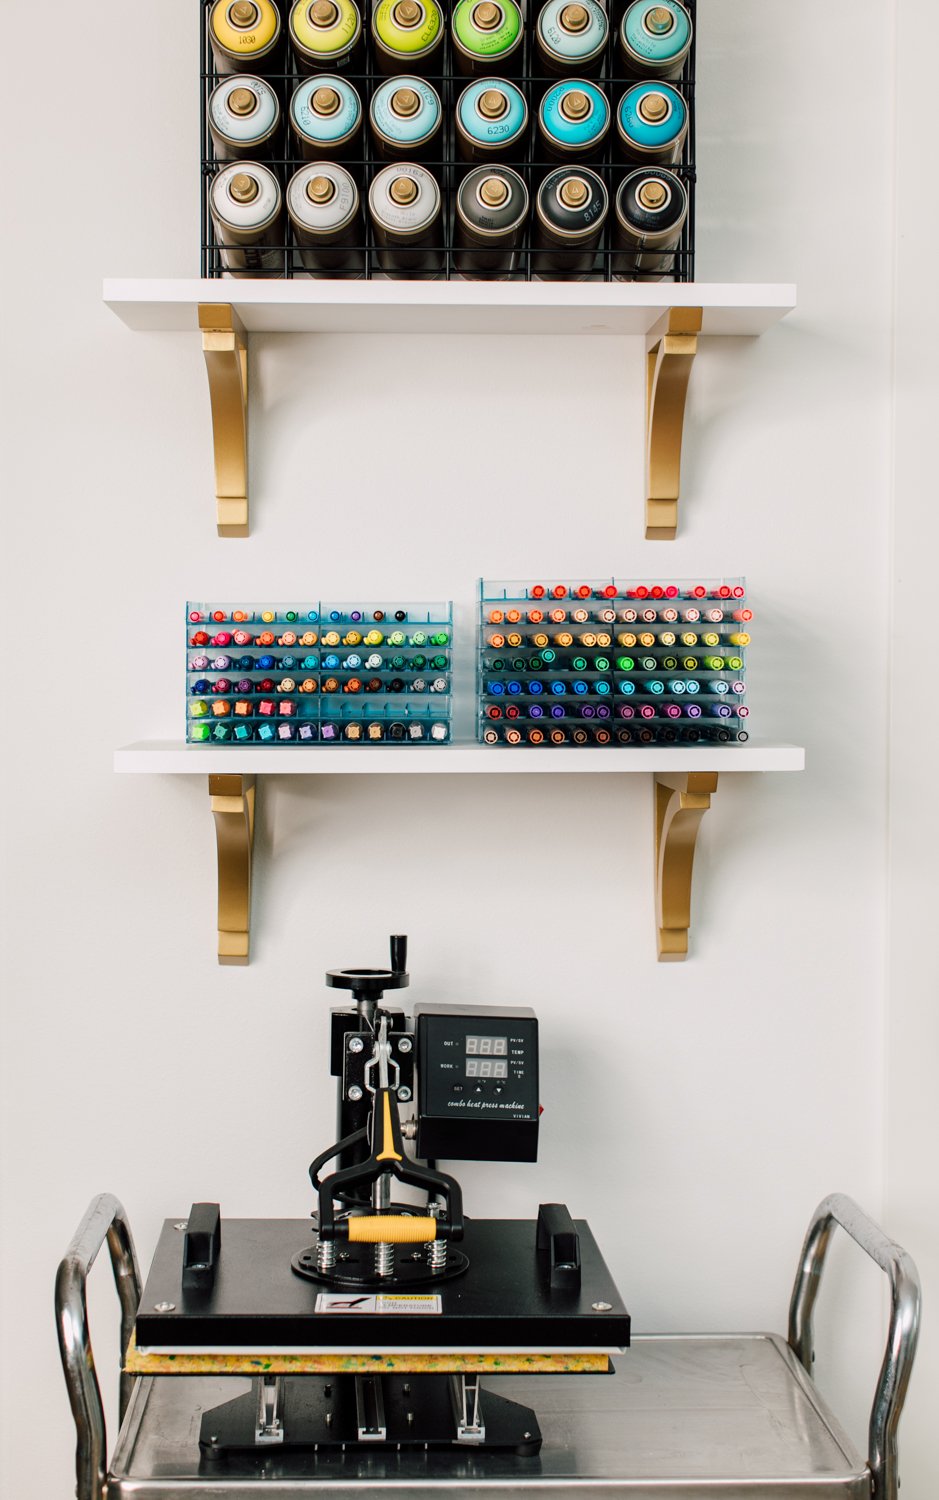 Heat press on cart, with shelves of pens and spray paint above. 